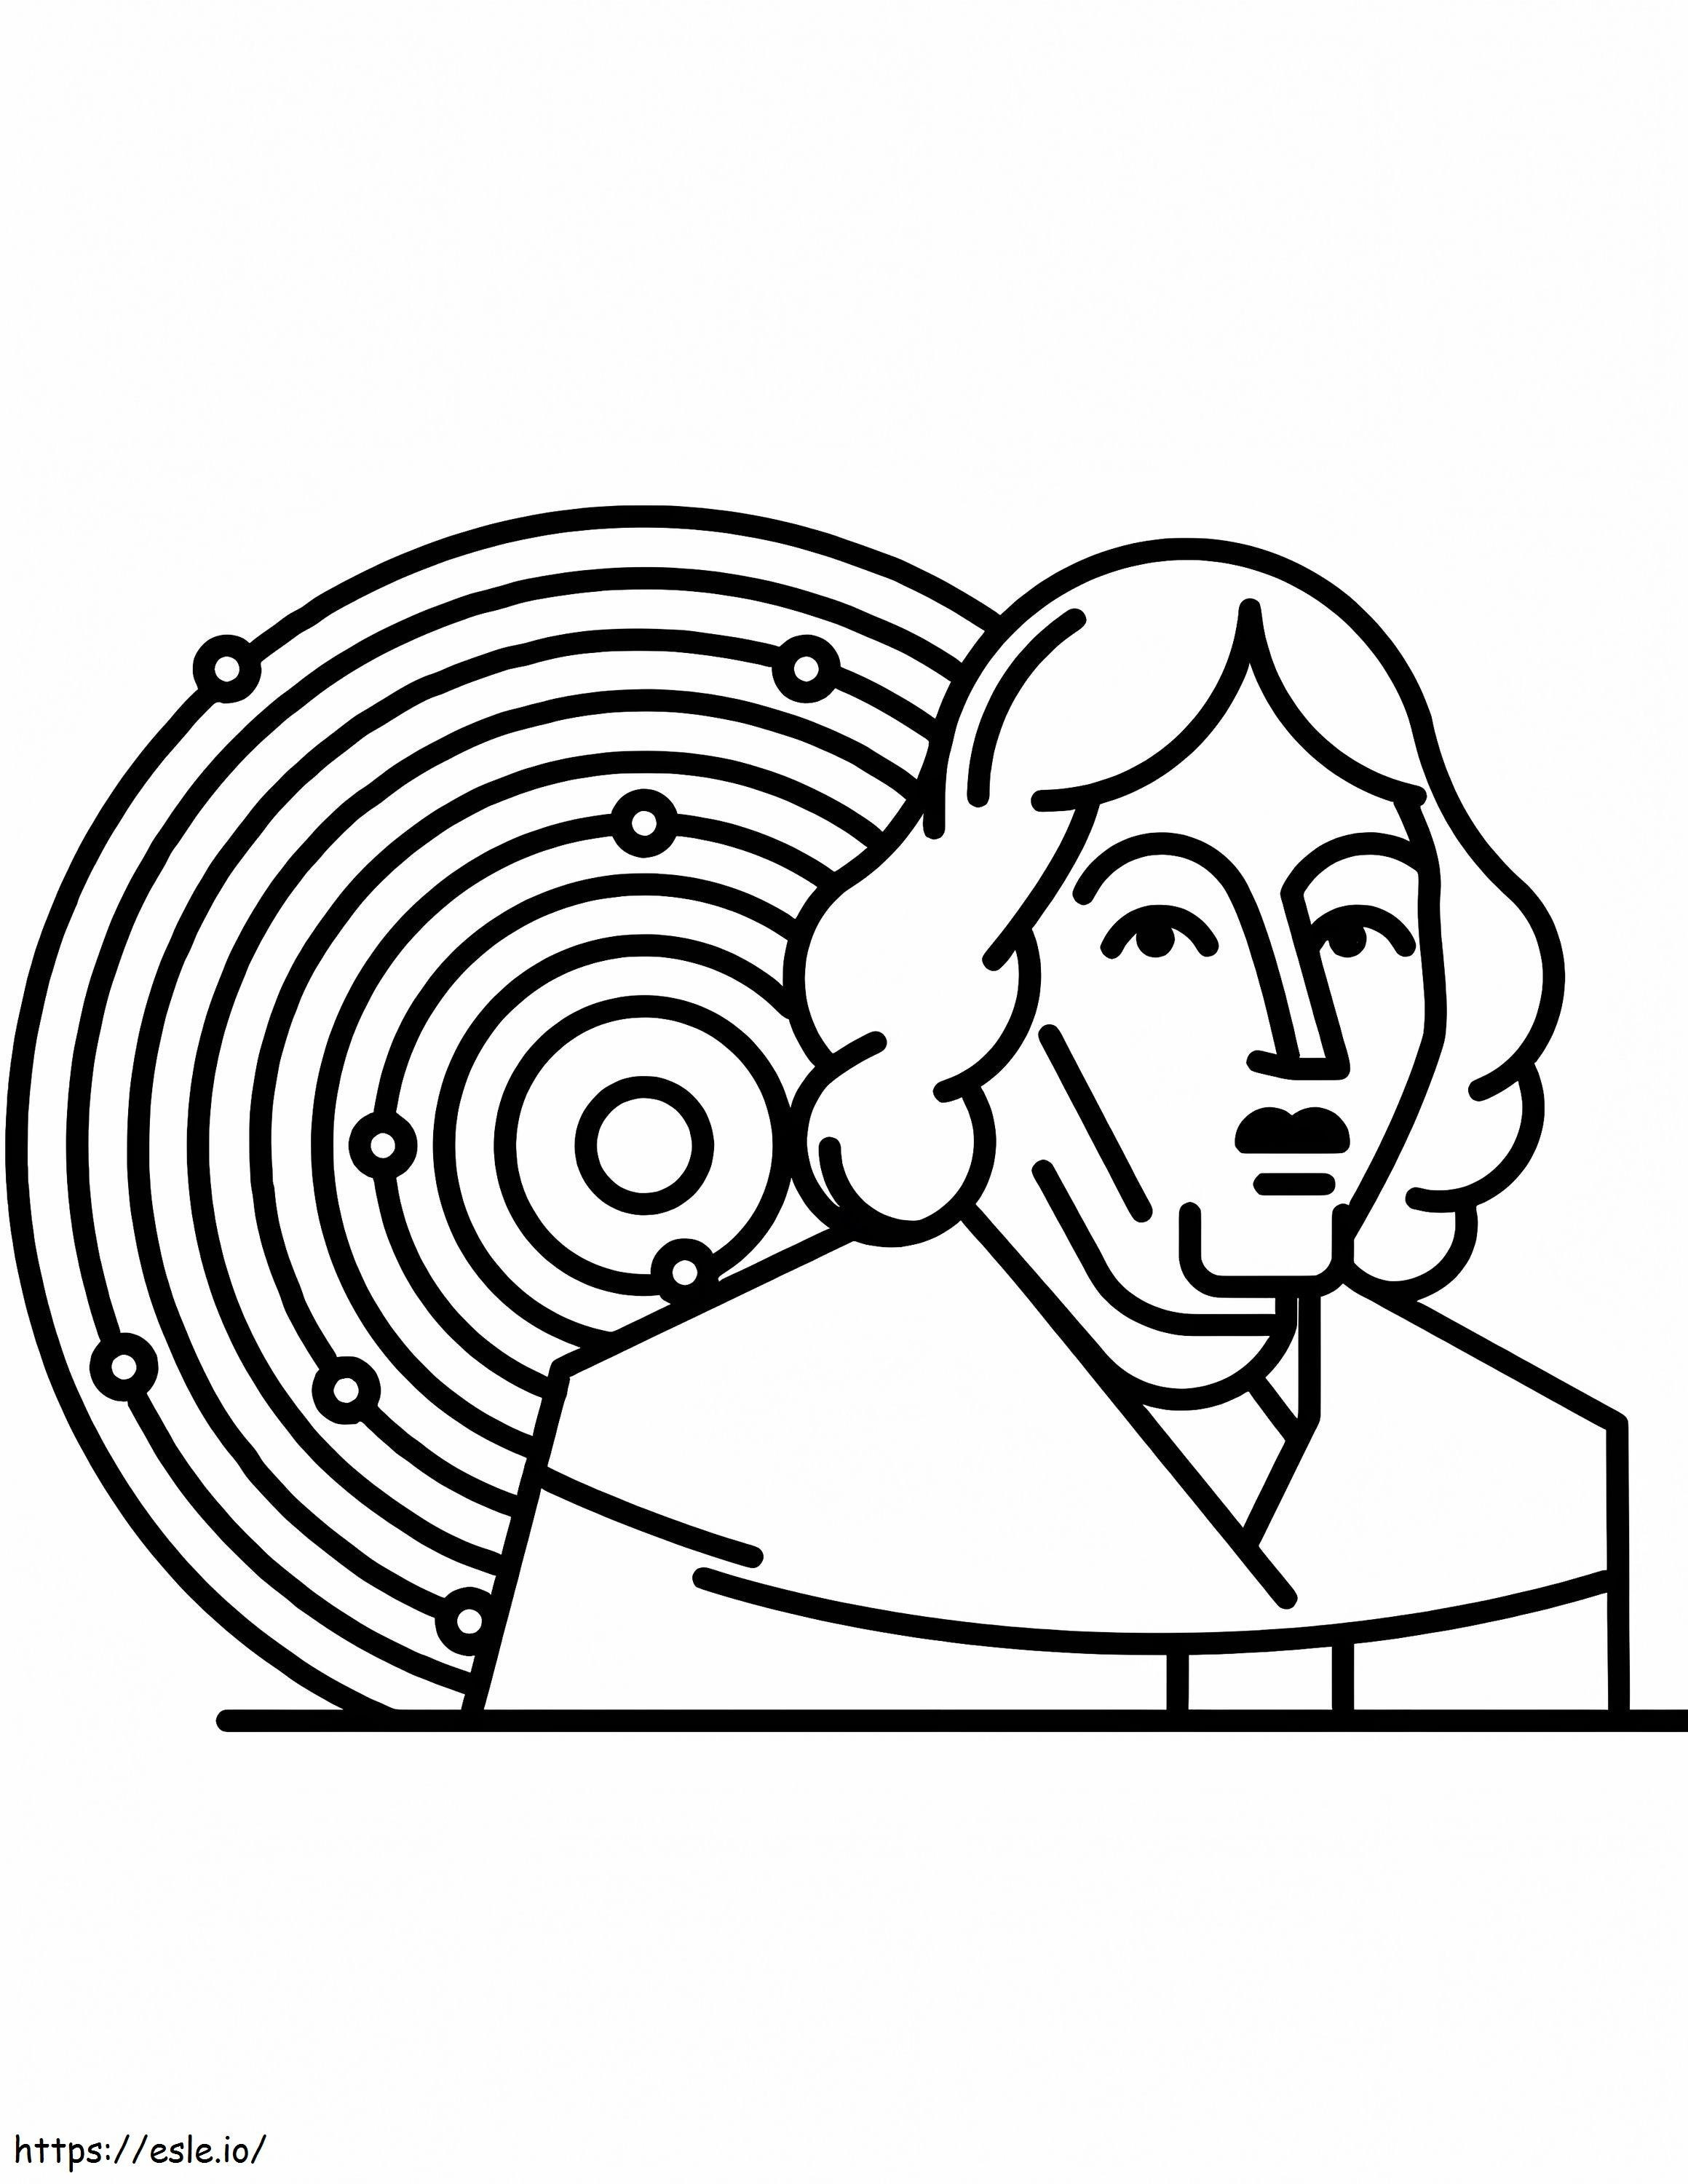 Copernicus And Solar System coloring page